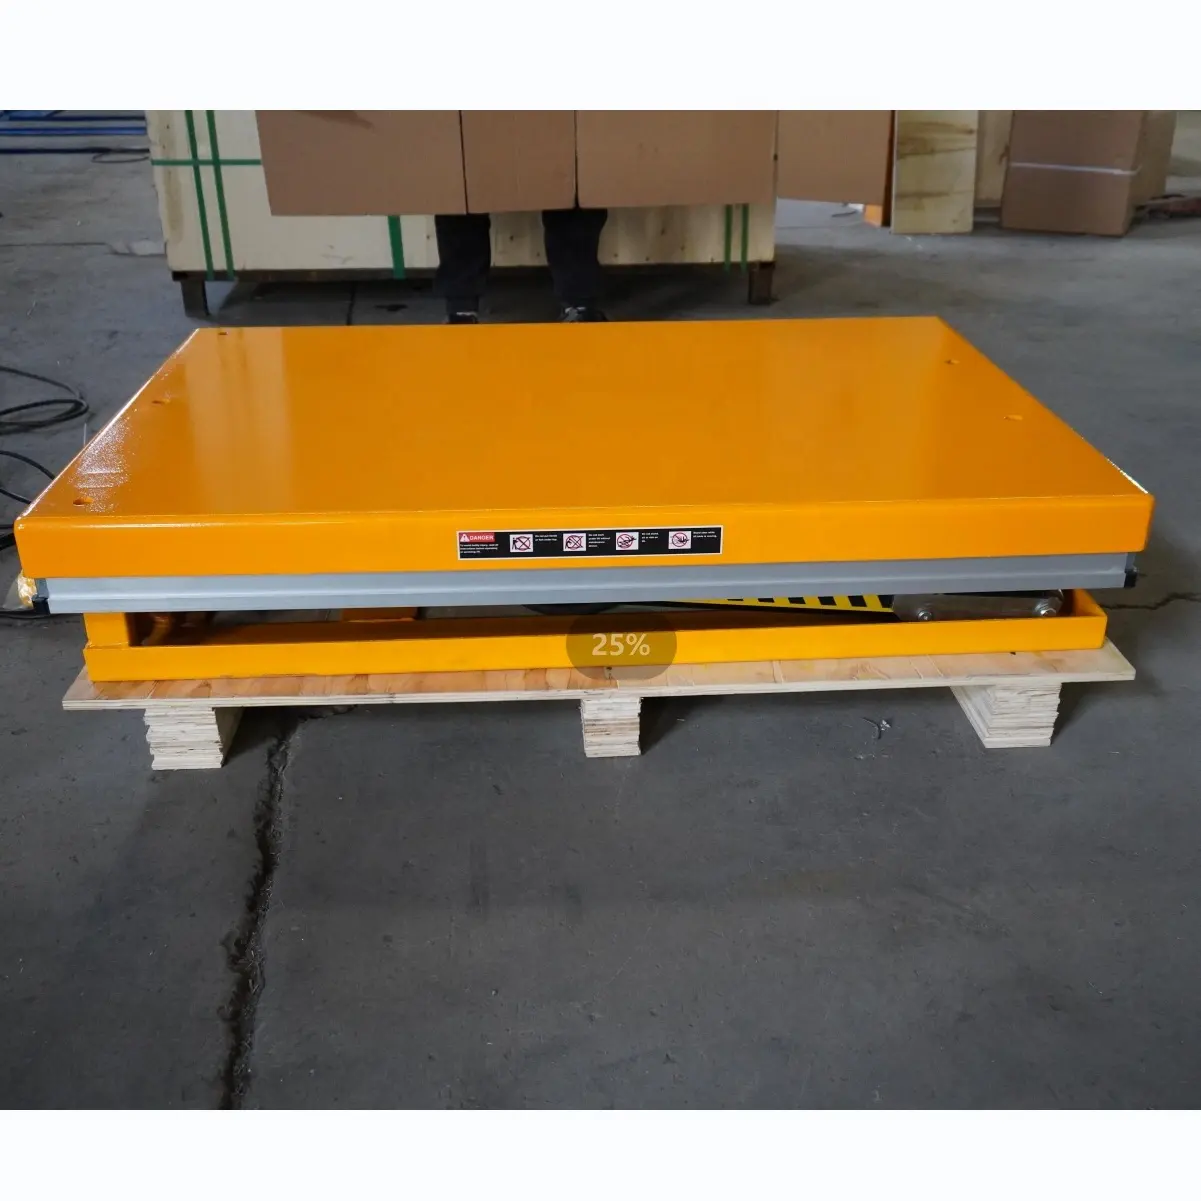 JS Lift Tables 1Ton Small Electric Hydraulic Lift Table High Quality Fixed Scissor Lifting Platform Lifter Table